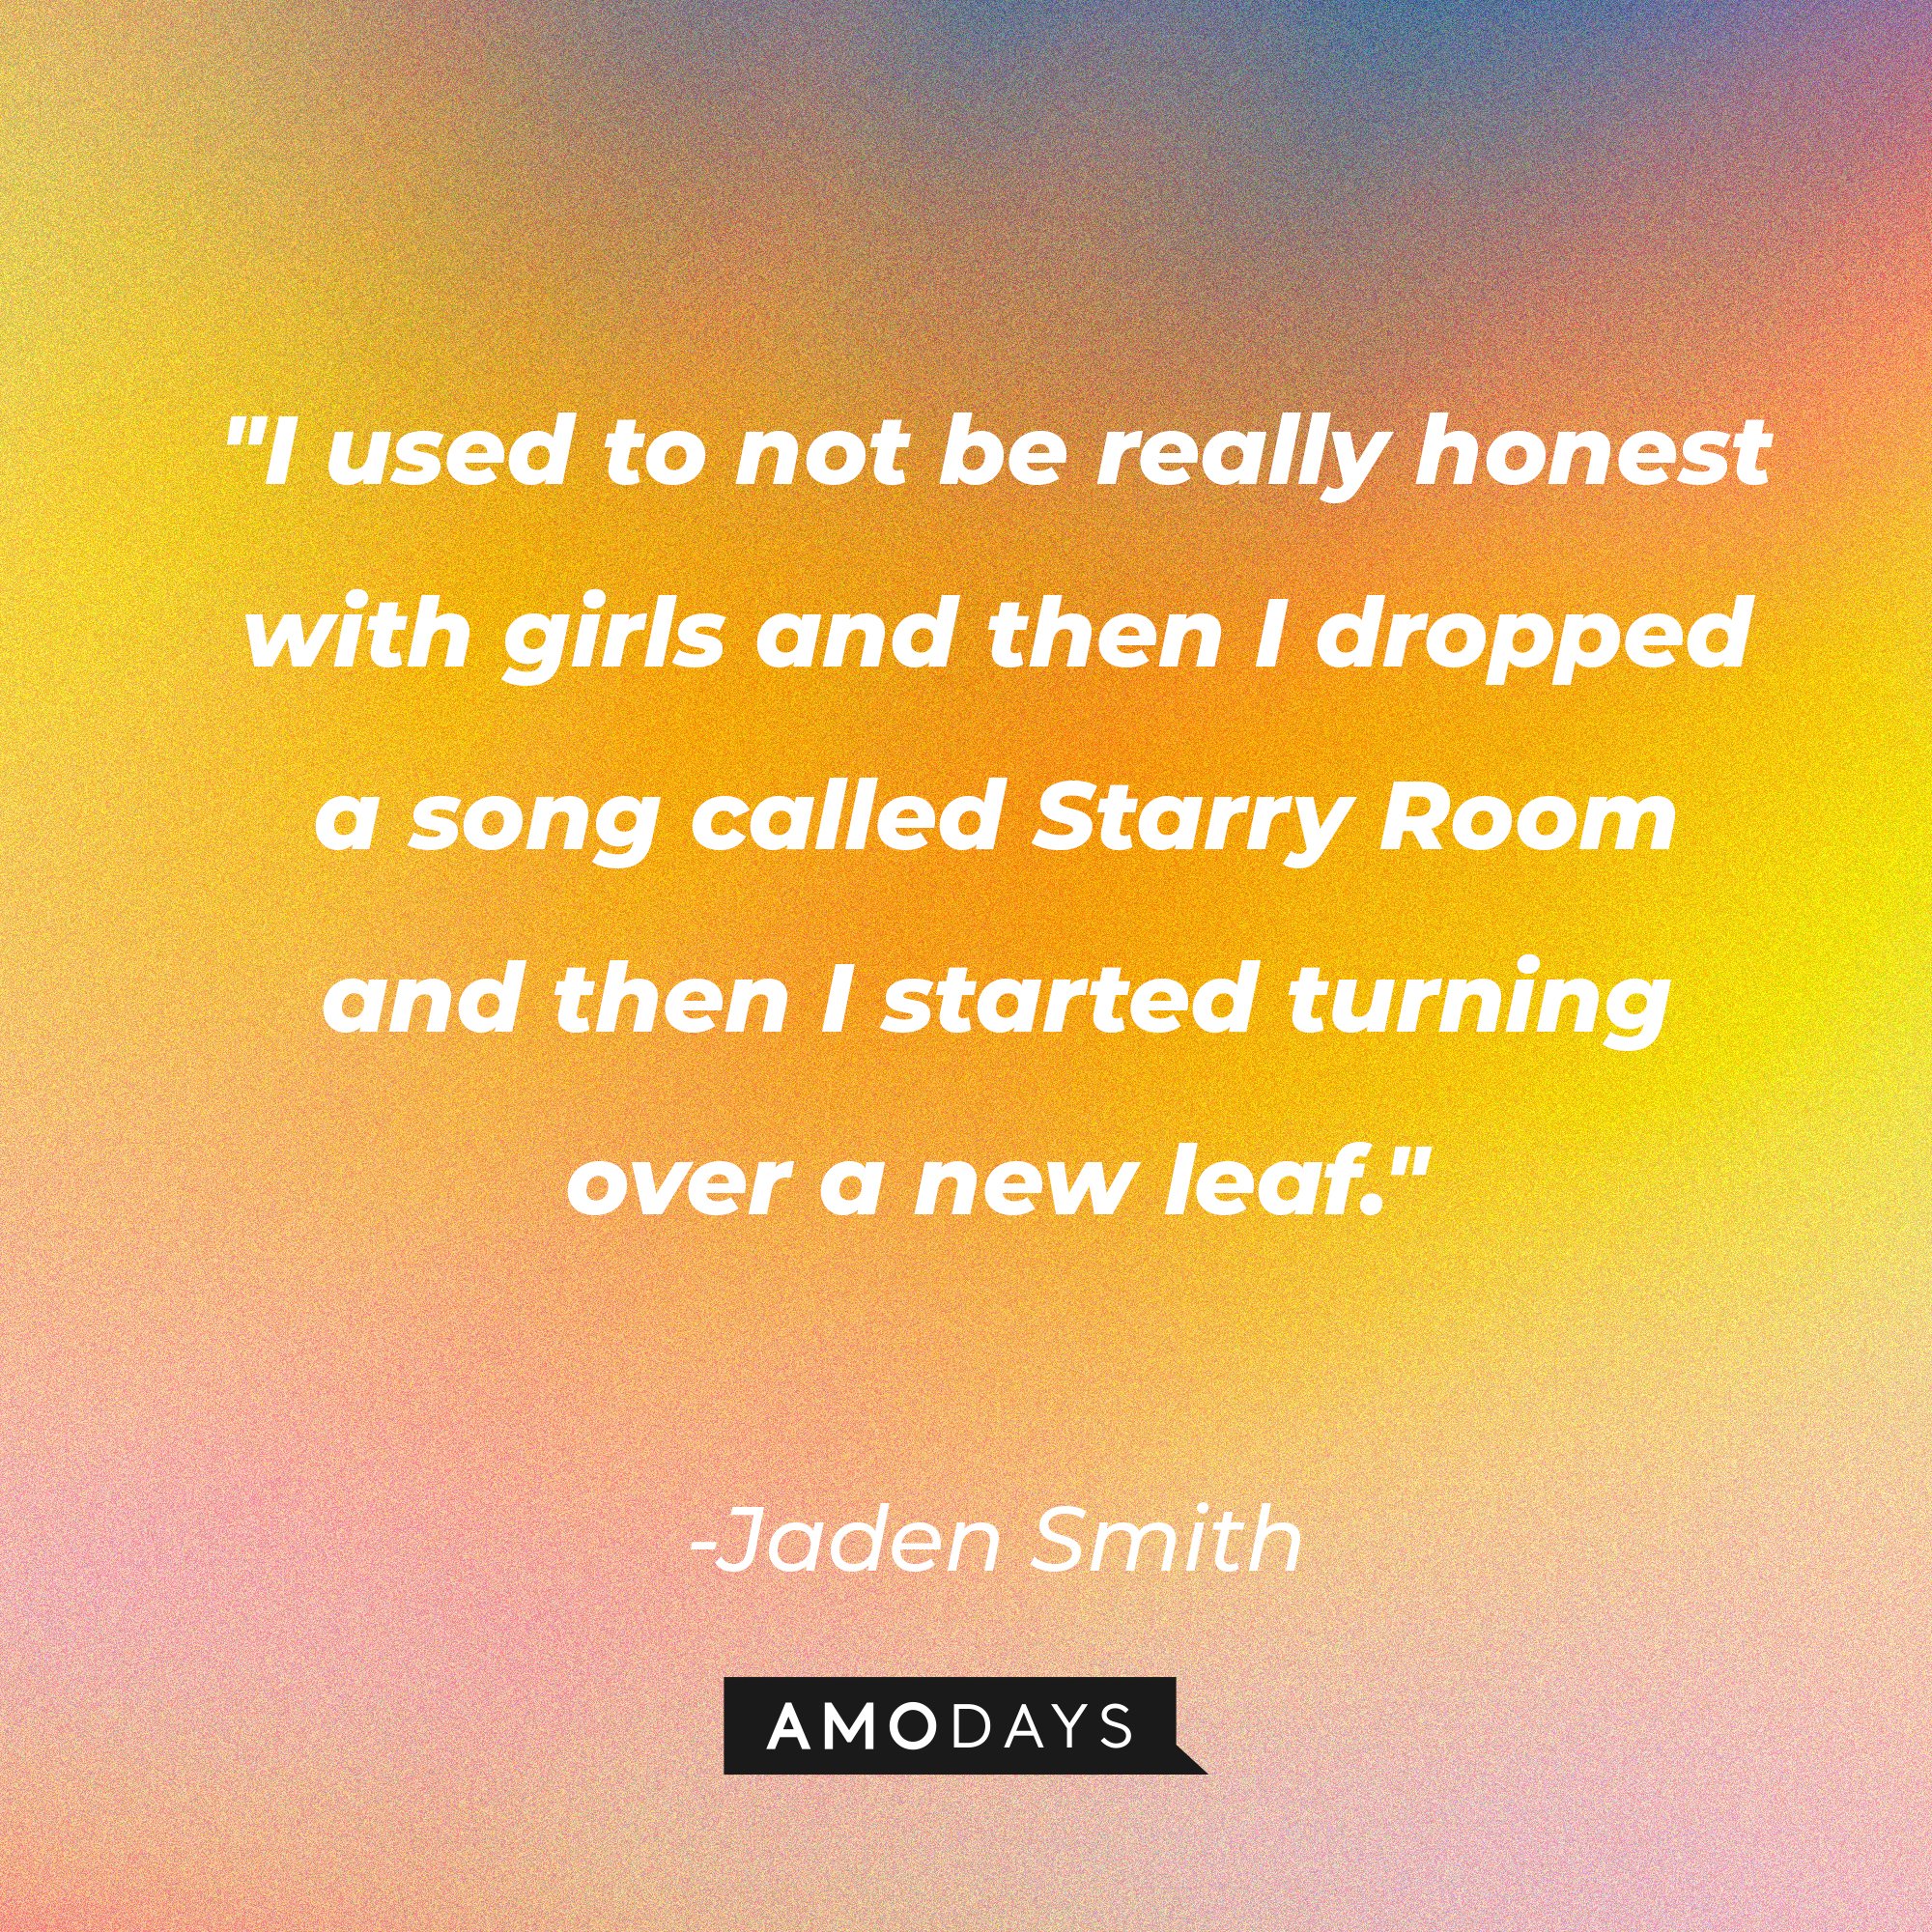 Jaden Smith's quote: "I used to not be really honest with girls and then I dropped a song called Starry Room and then I started turning over a new leaf." | Image: AmoDays